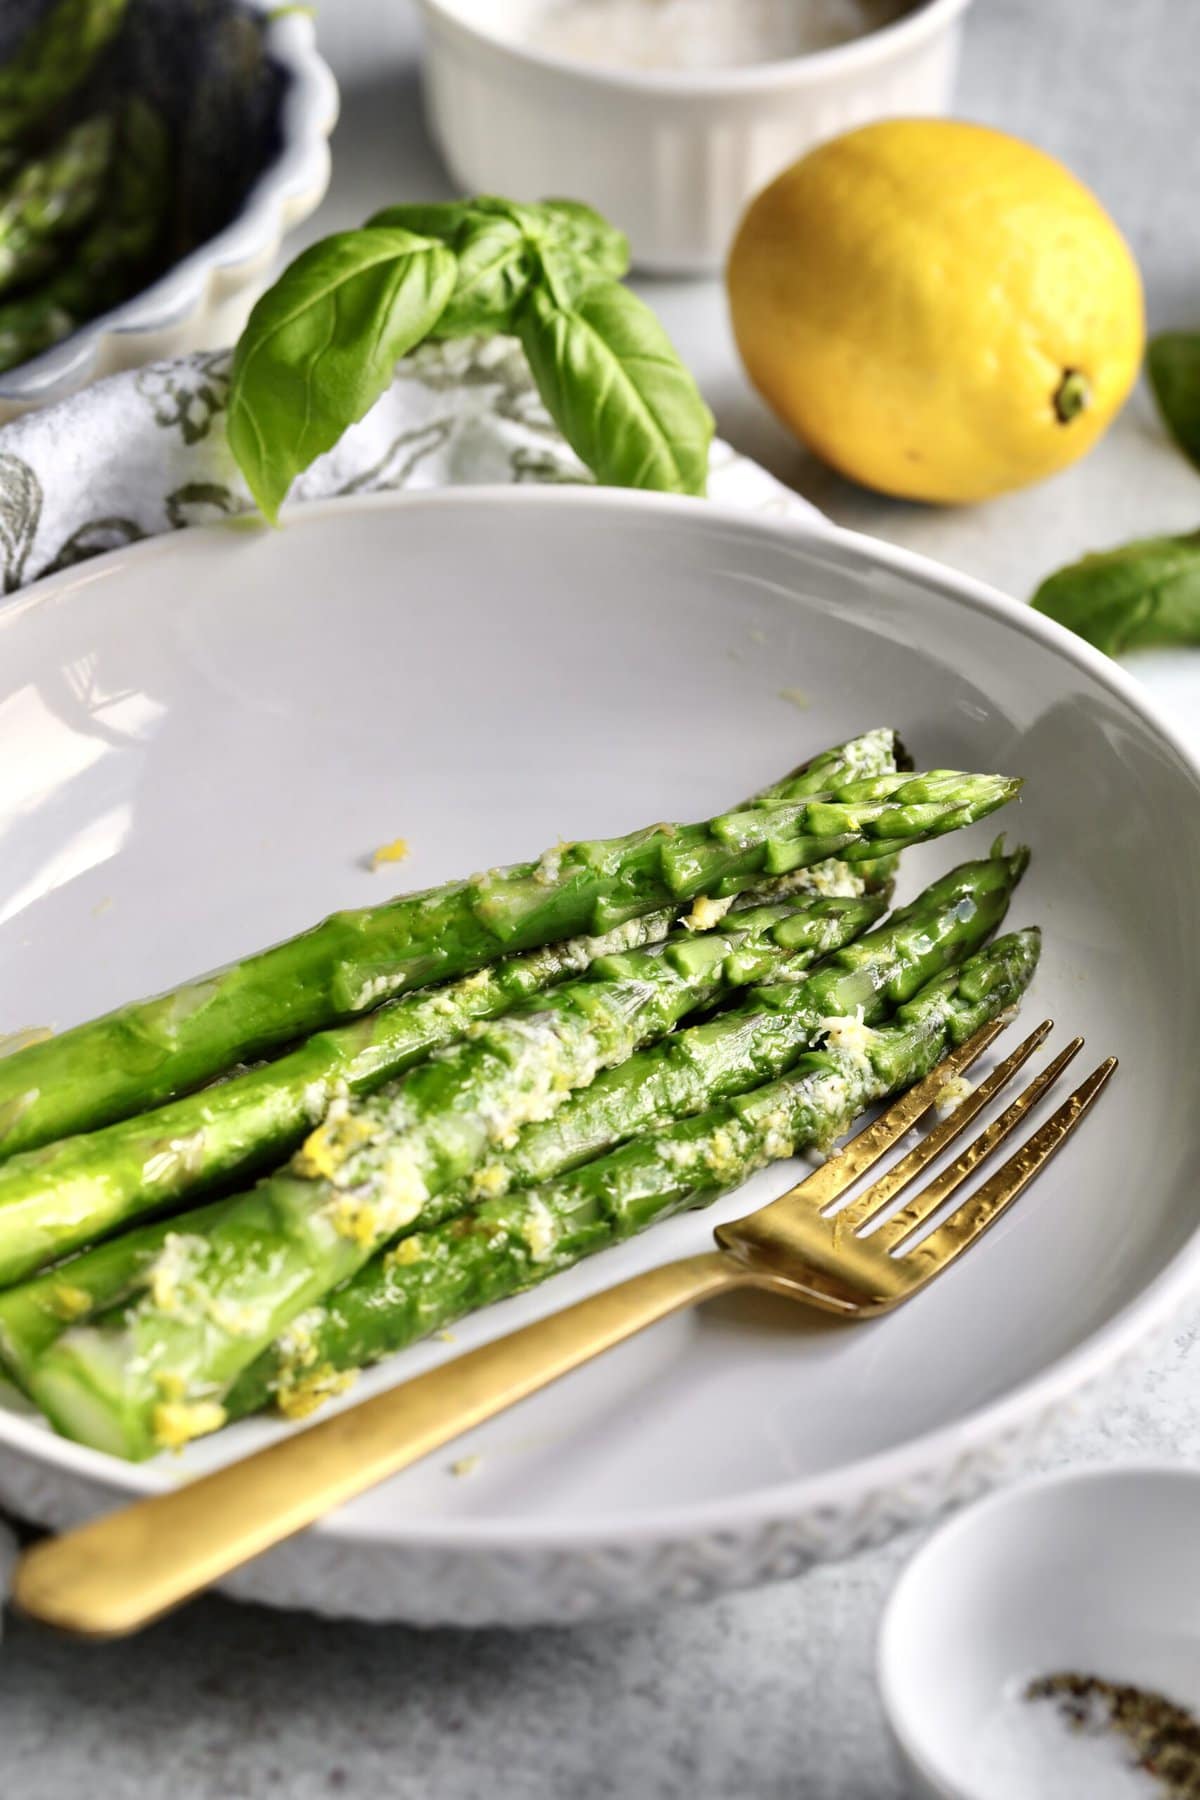 Simple Steamed Asparagus Recipe (Quick and Easy) on a plate with a fork. Lemon and basil as garnish.